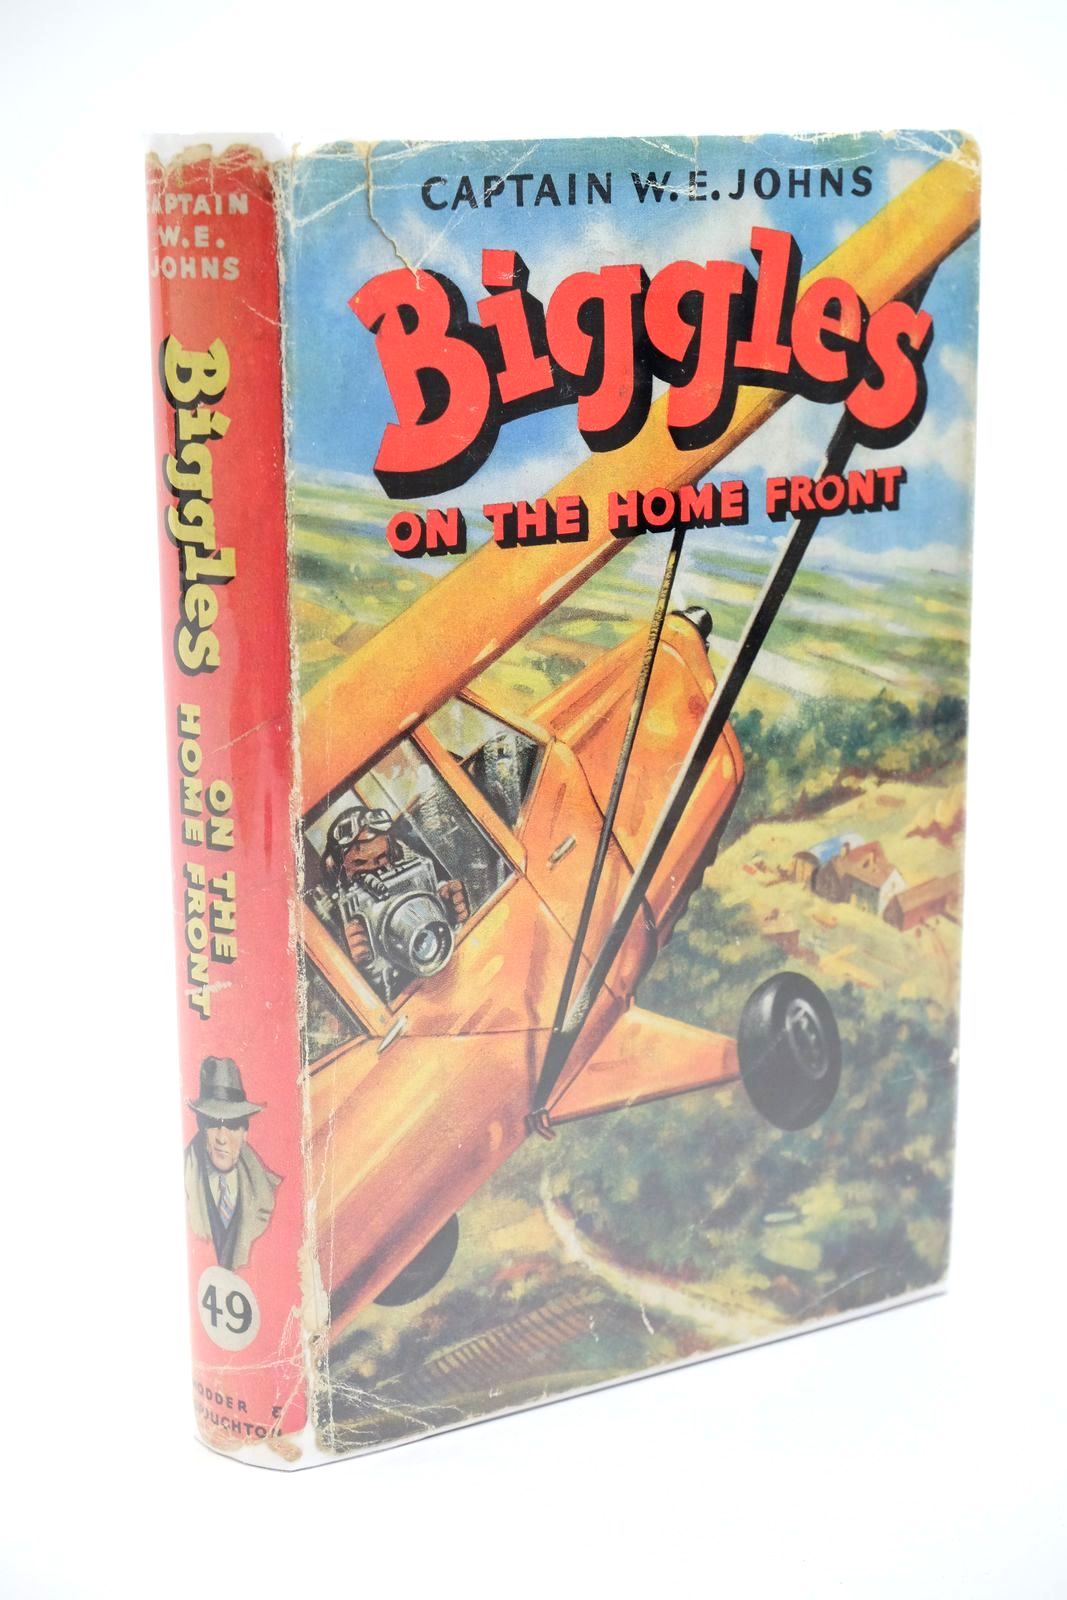 Photo of BIGGLES ON THE HOME FRONT written by Johns, W.E. illustrated by Stead,  published by Hodder &amp; Stoughton (STOCK CODE: 1323255)  for sale by Stella & Rose's Books